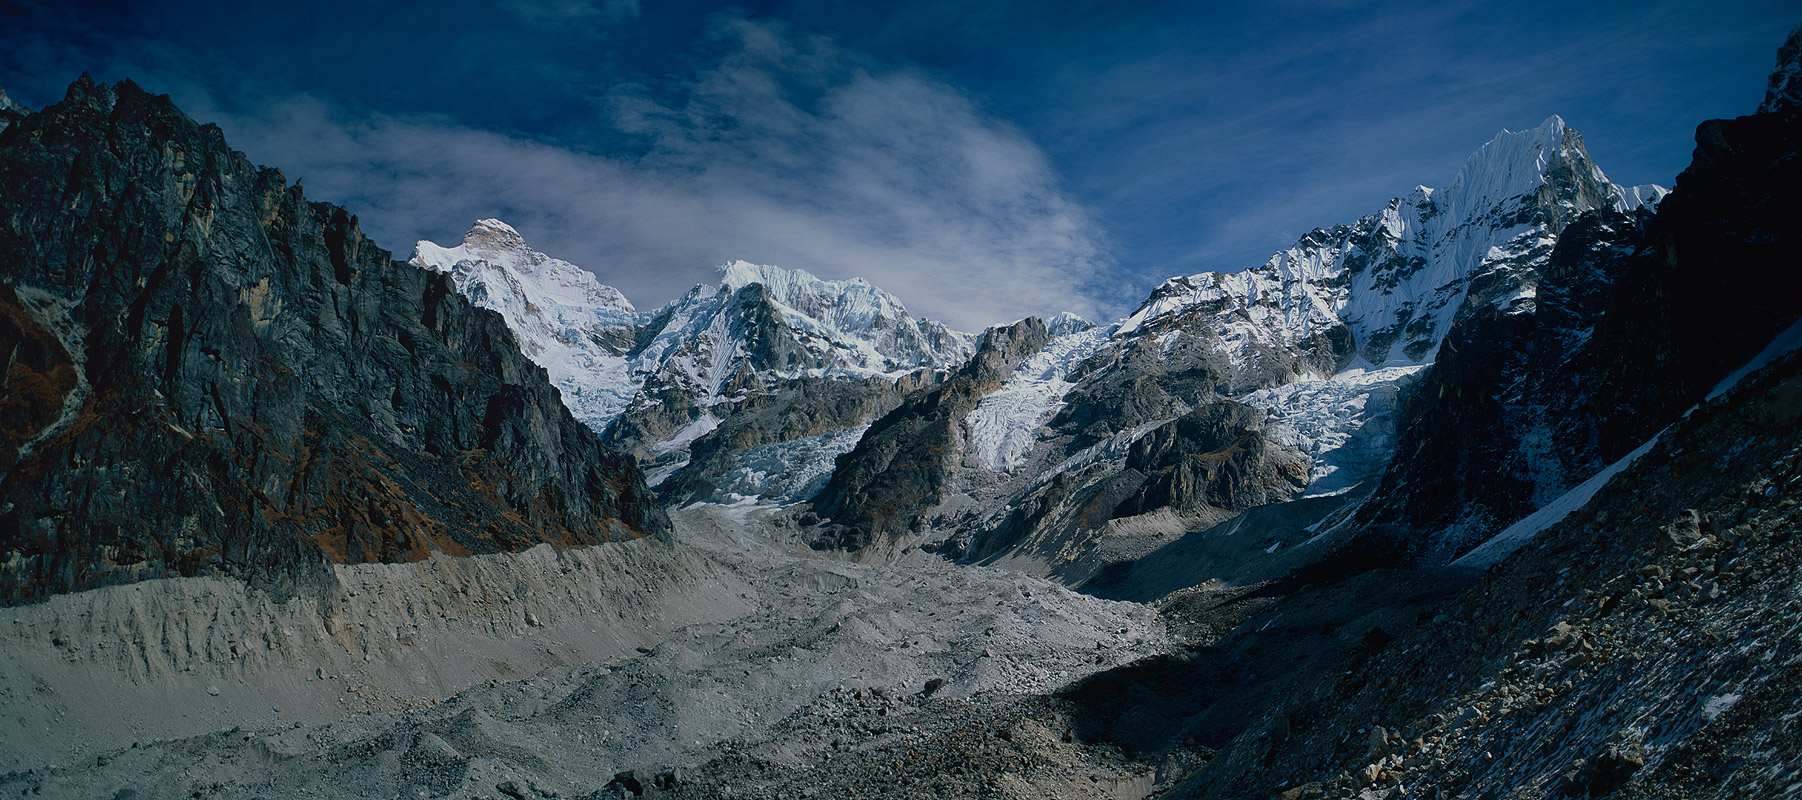 Seen looking up the Yamatari glacier after a crossing of the Lapsang La. This is a stitched panorama of two medium format transparencies.Bronica ETRSi, 50mm, Fuji Velvia